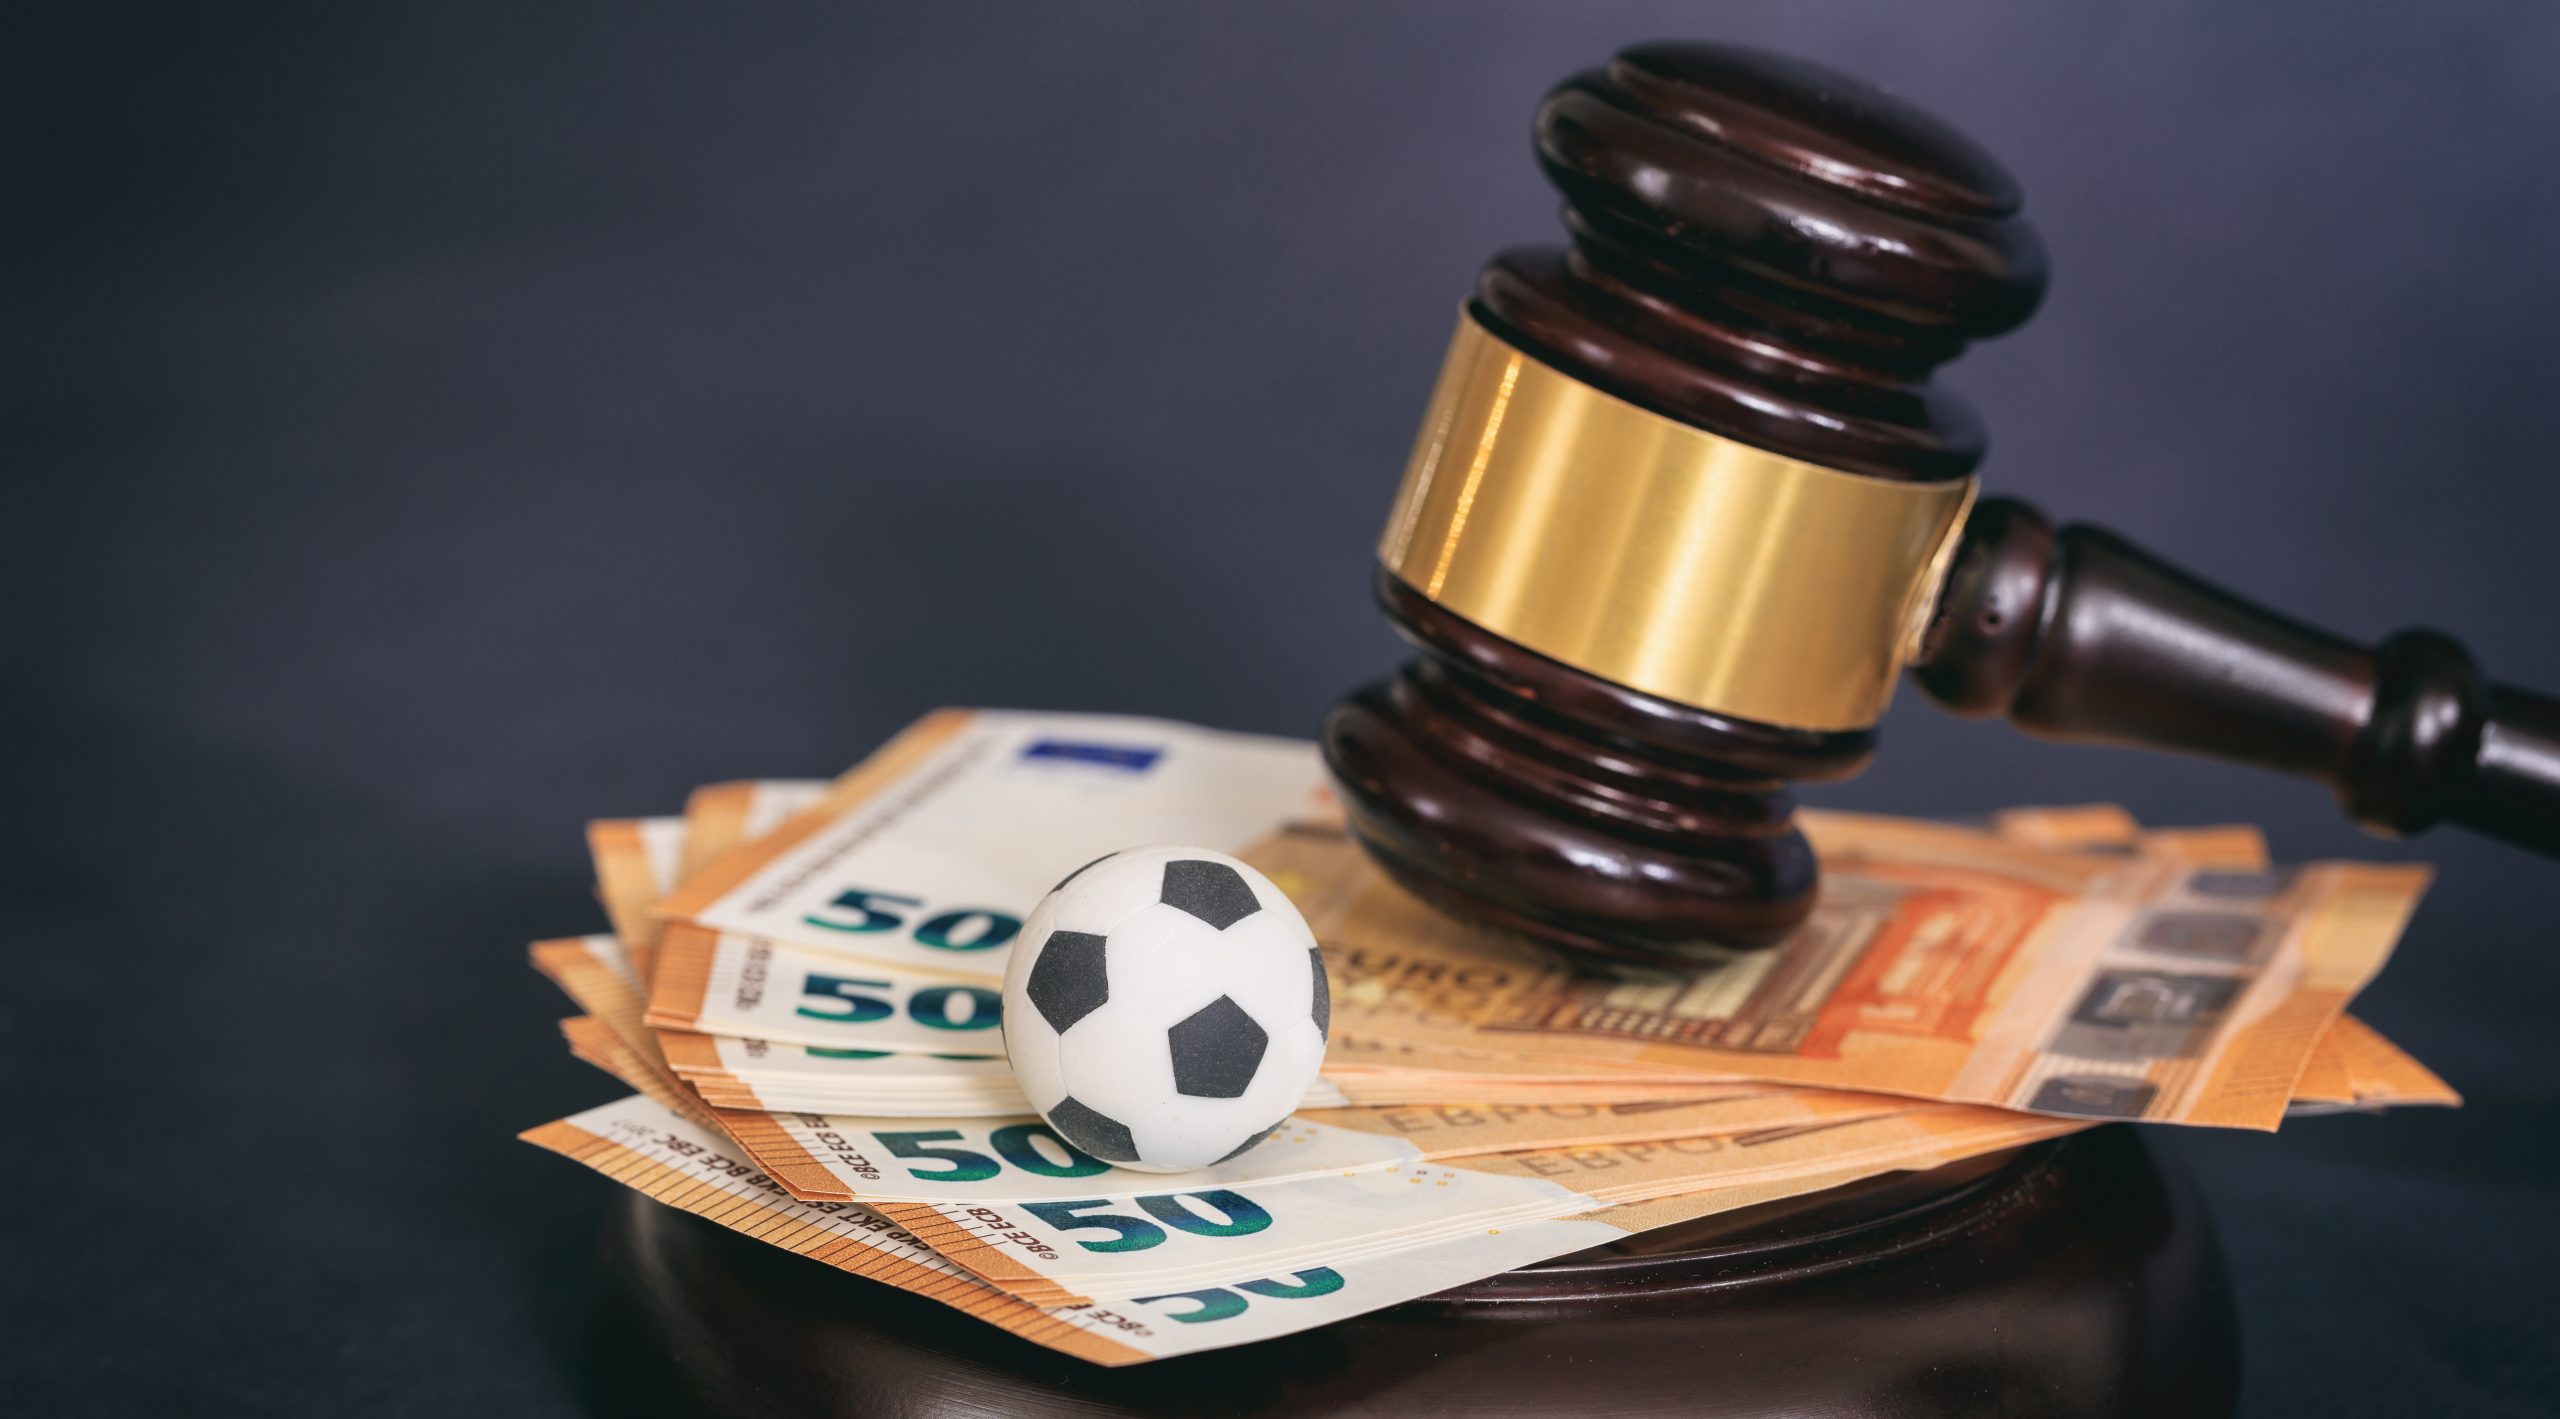 Half a million riyals fine for violating FIFA's intellectual property rights